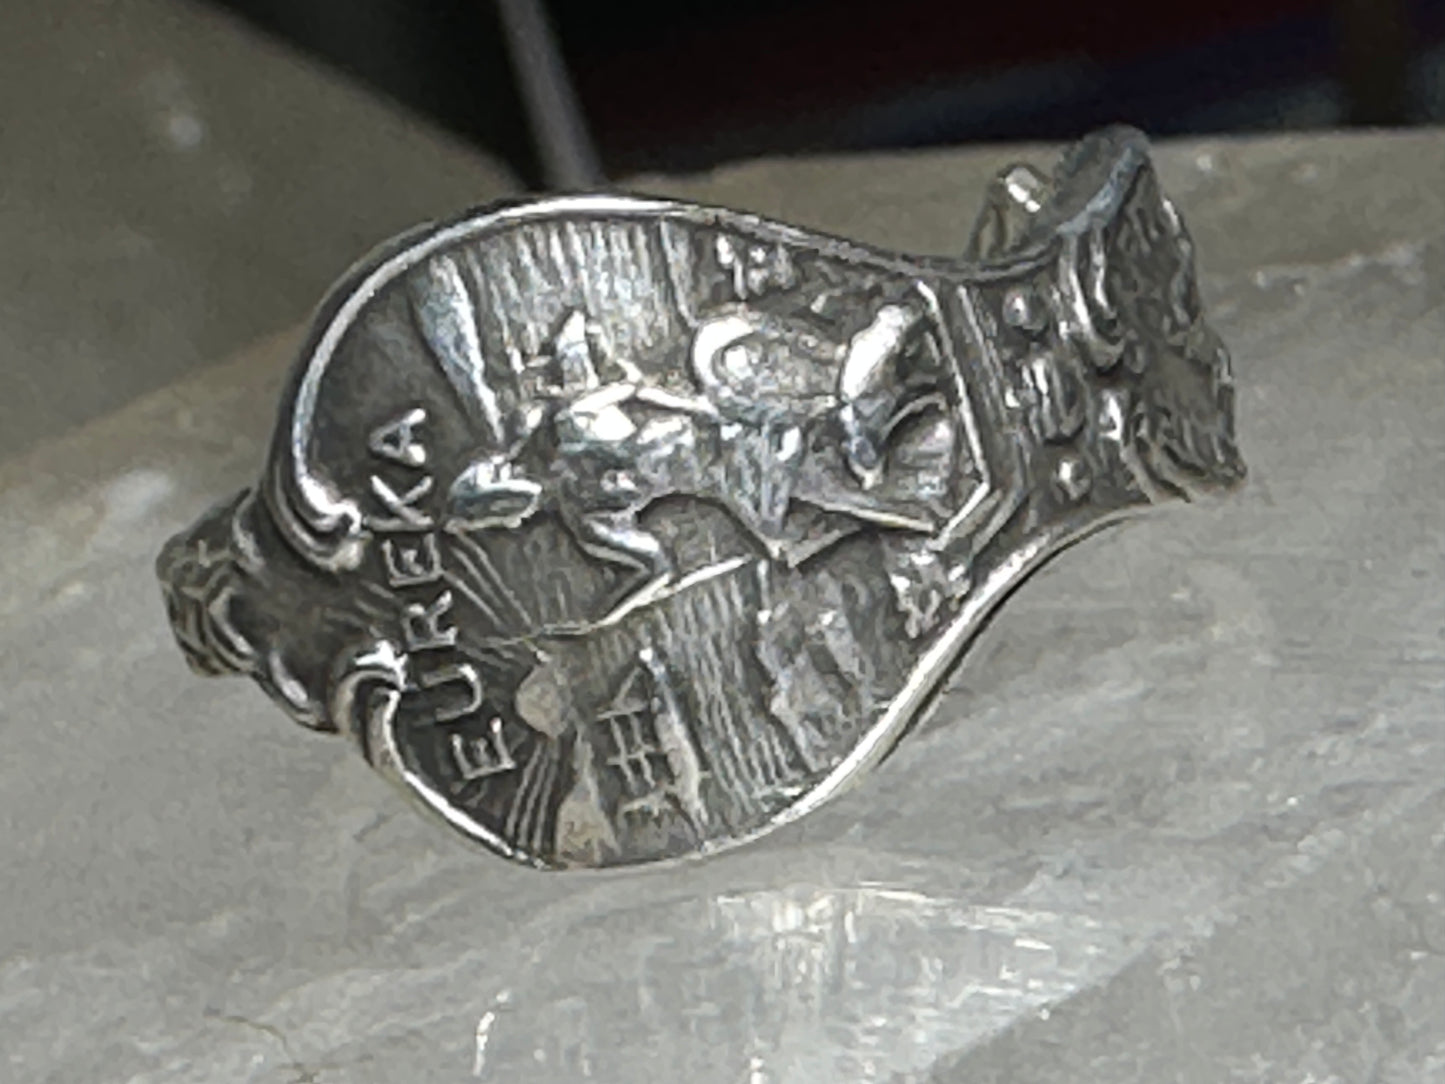 Eureka California spoon ring Mission ring Humboldt State Capital band size 5.25 sterling silver